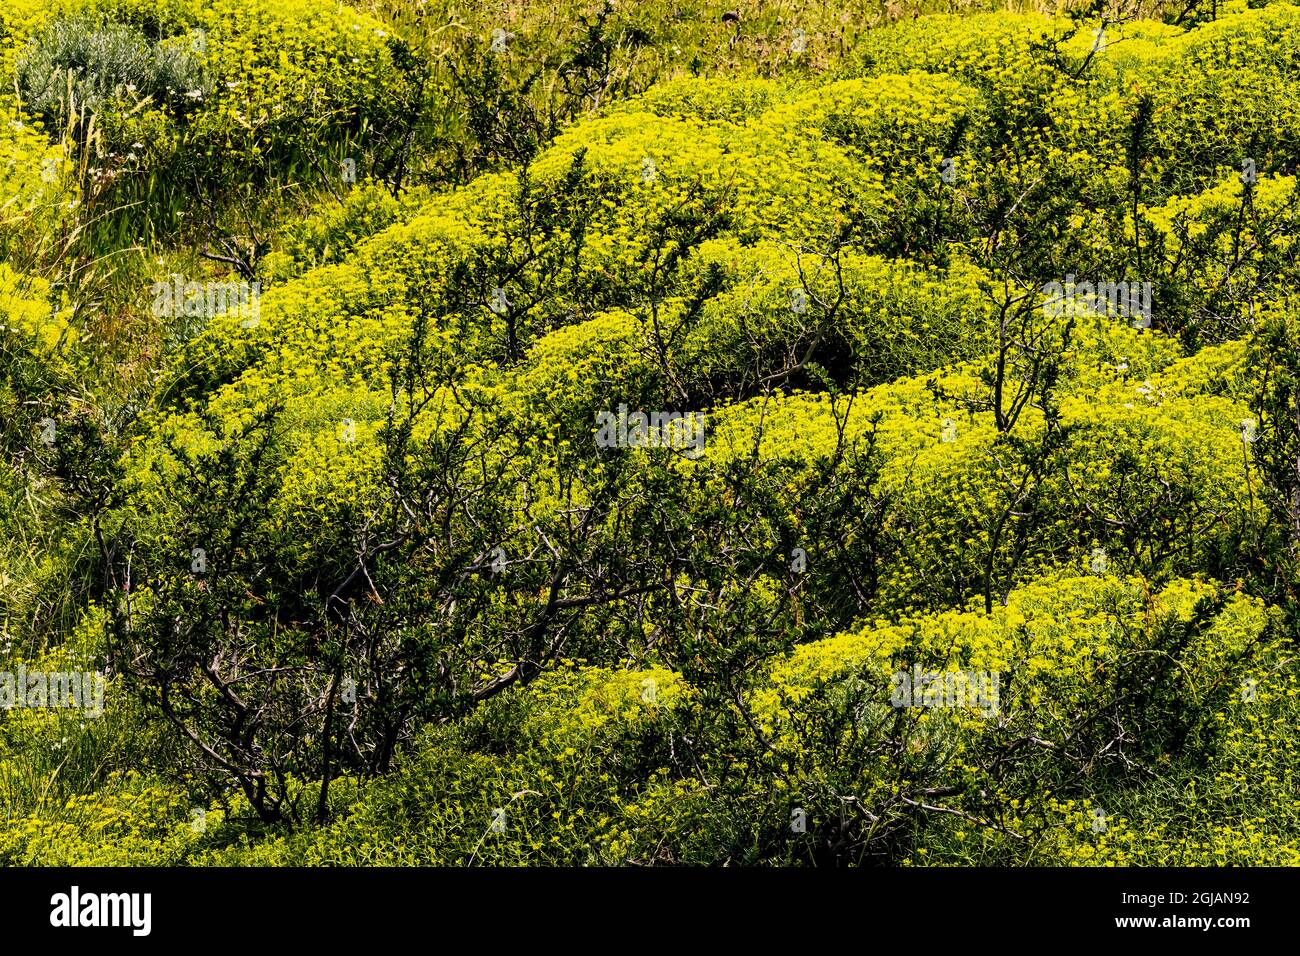 Yellow gold moss sedum ground cover, Torres del Paine National Park, Patagonia, Chile Stock Photo